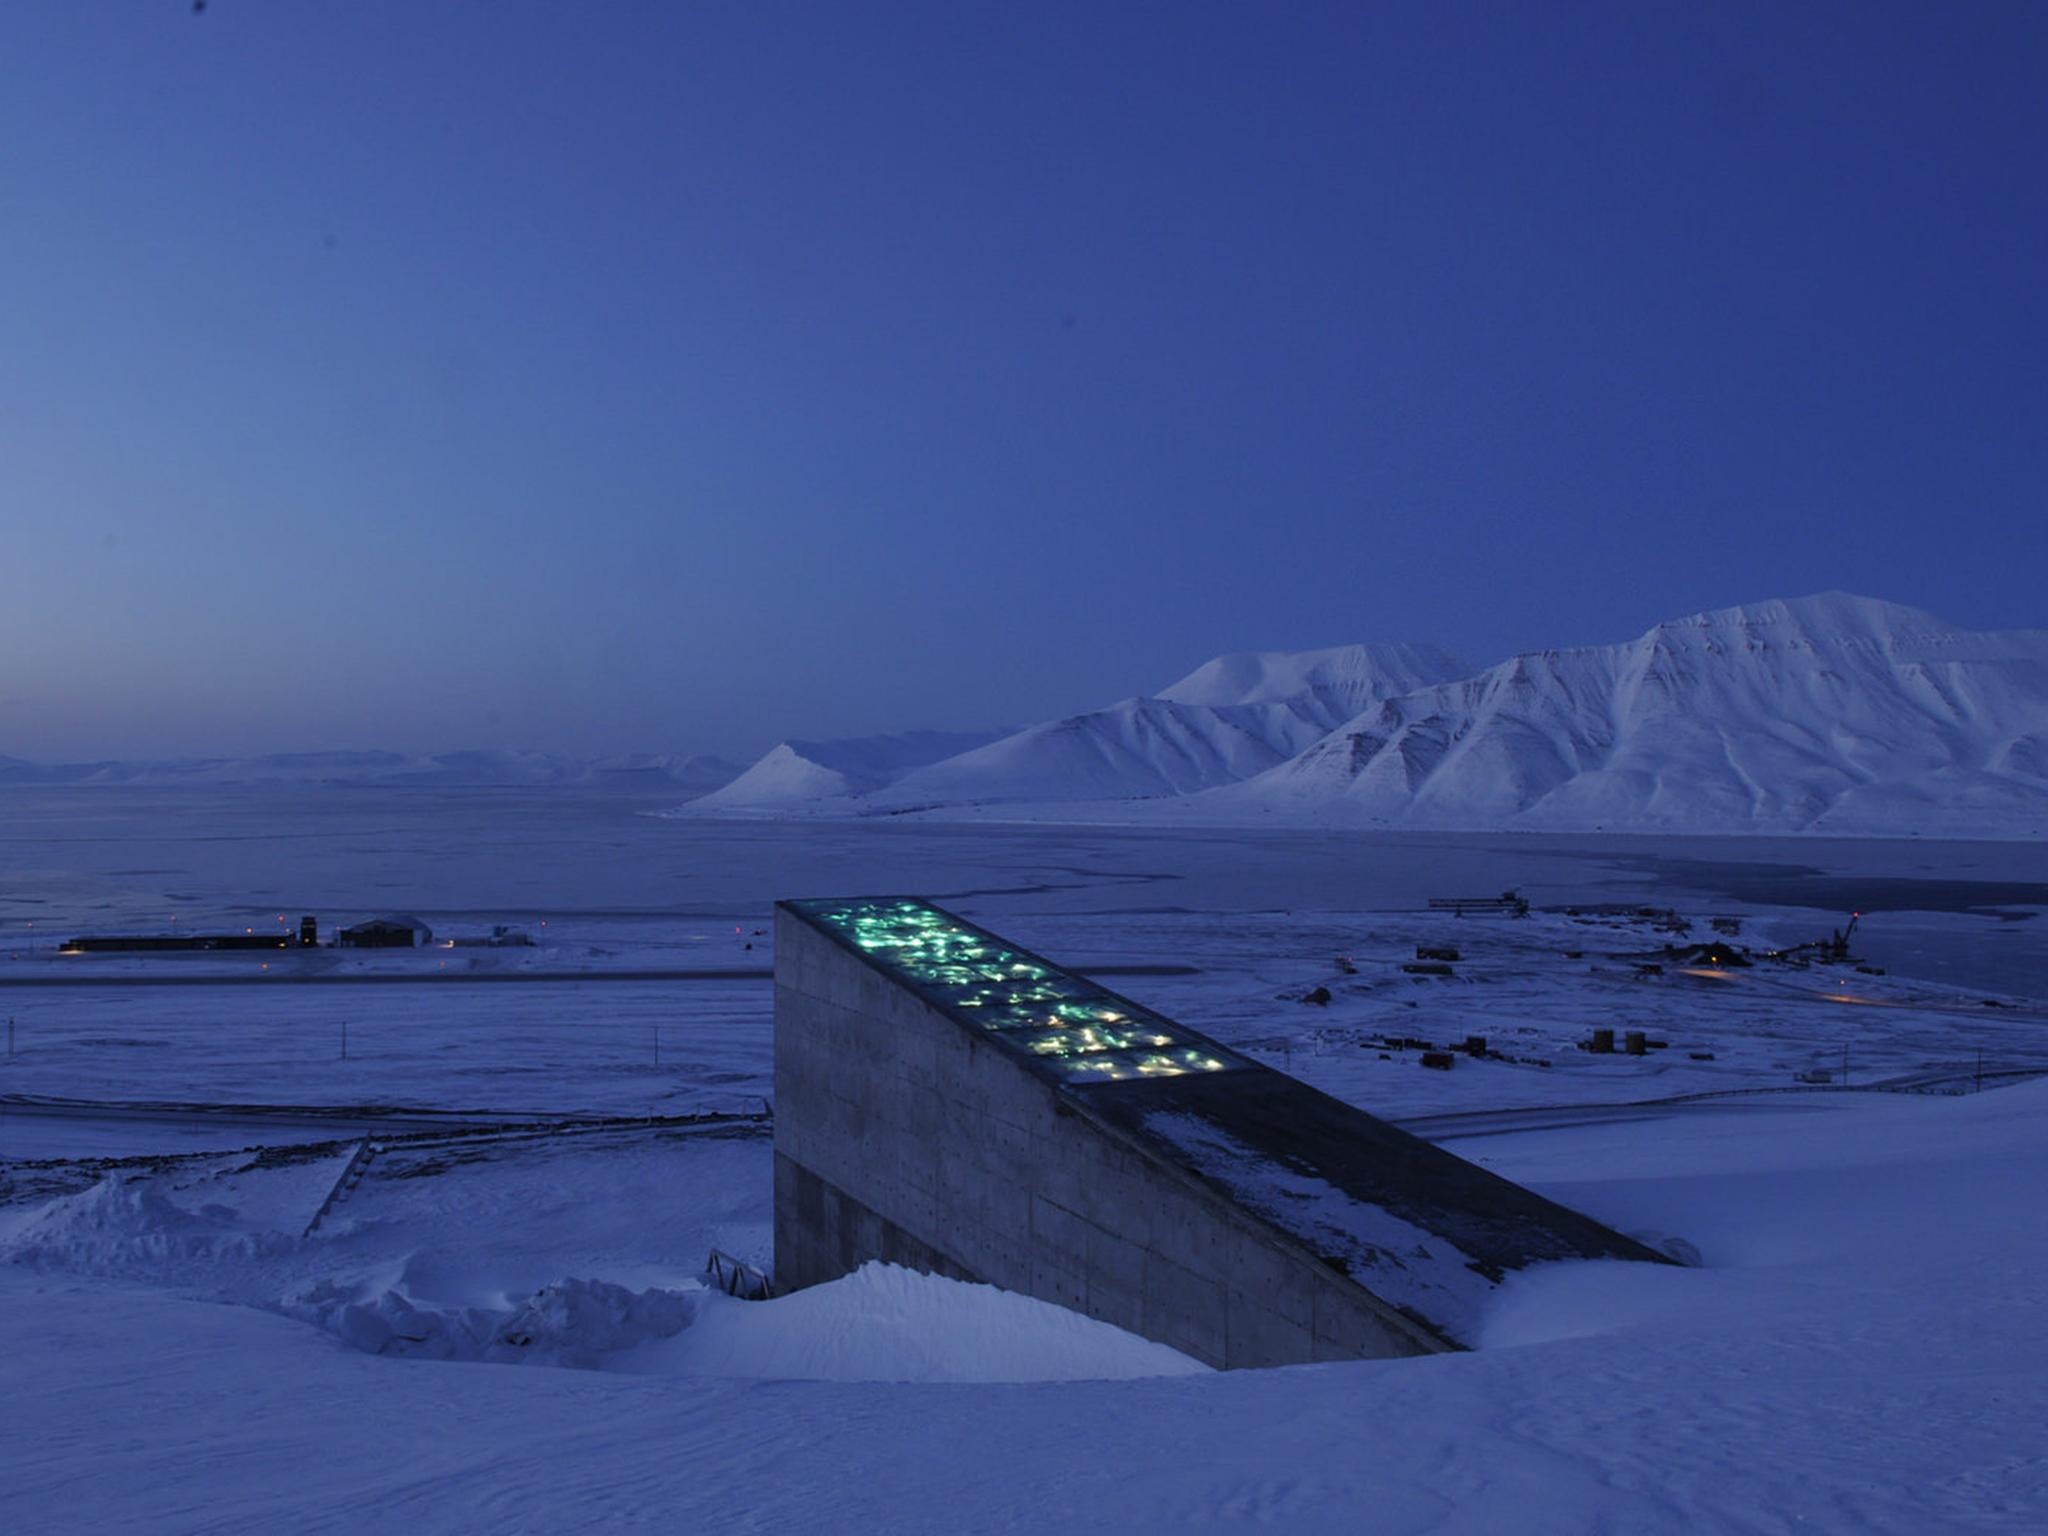 The entrance to the Global Seed Vault, on Spitsbergen Island in Svalbard, a few hundred miles from the North Pole